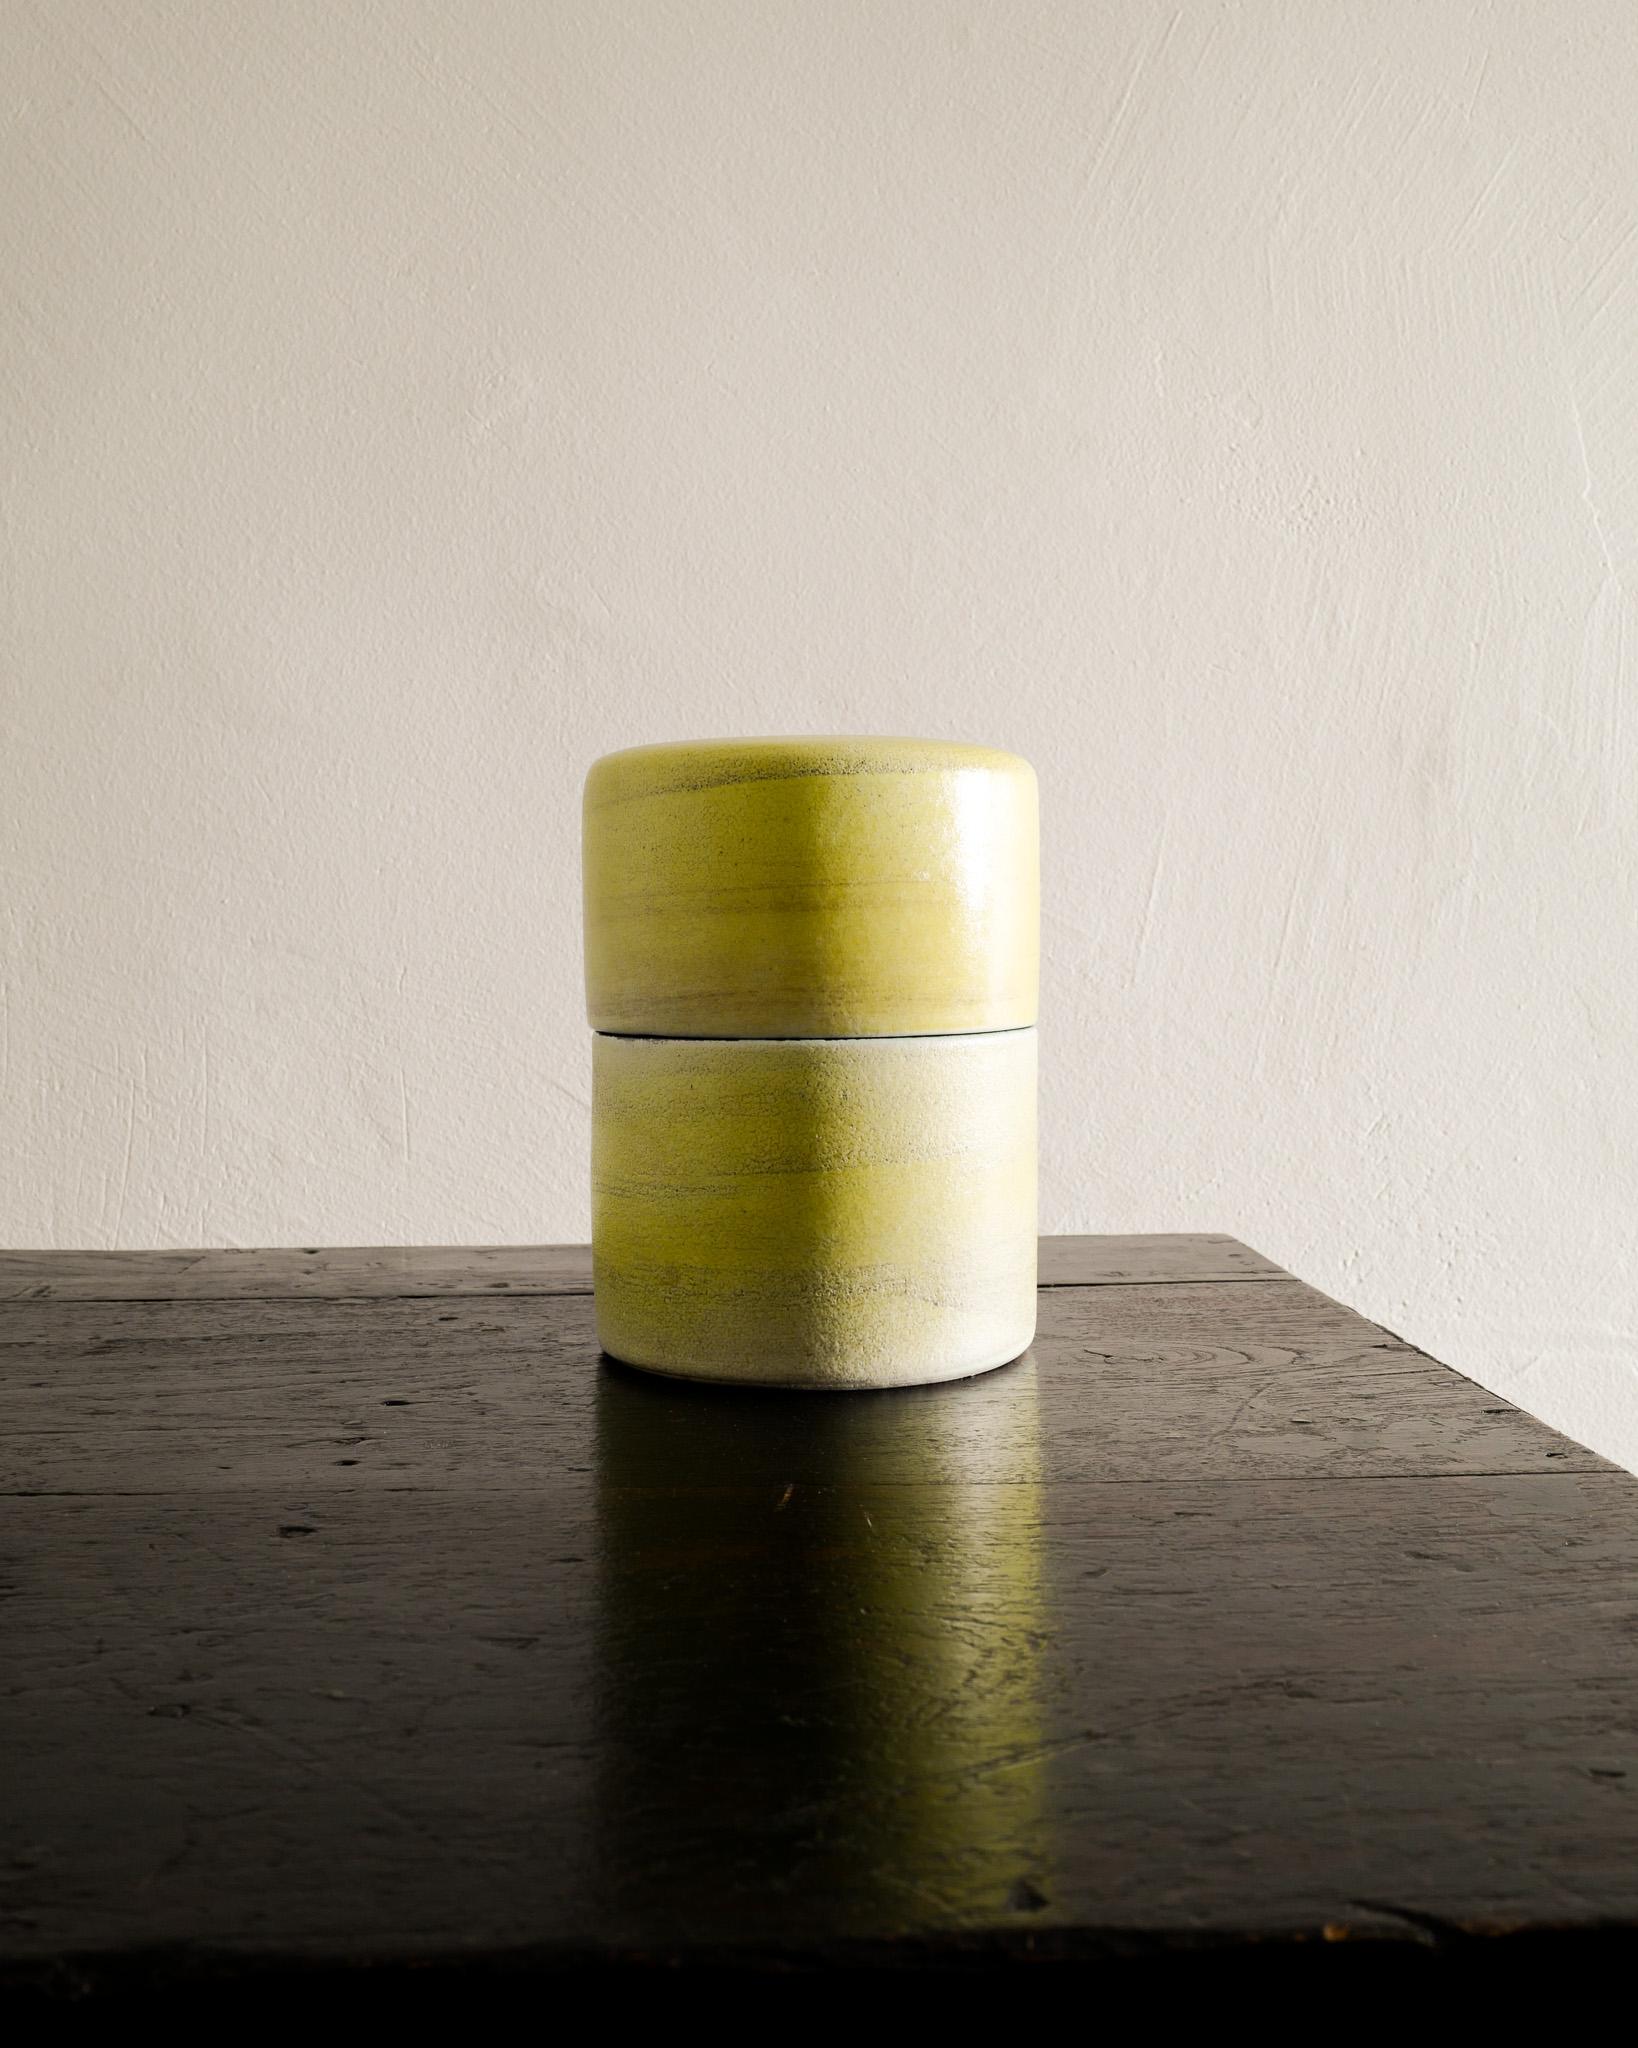 Very rare mid century yellow ceramic cylinder by Georges Jouve produced in France 1950s. In good original condition. Signed. 

Dimensions: H: 18 cm / 7